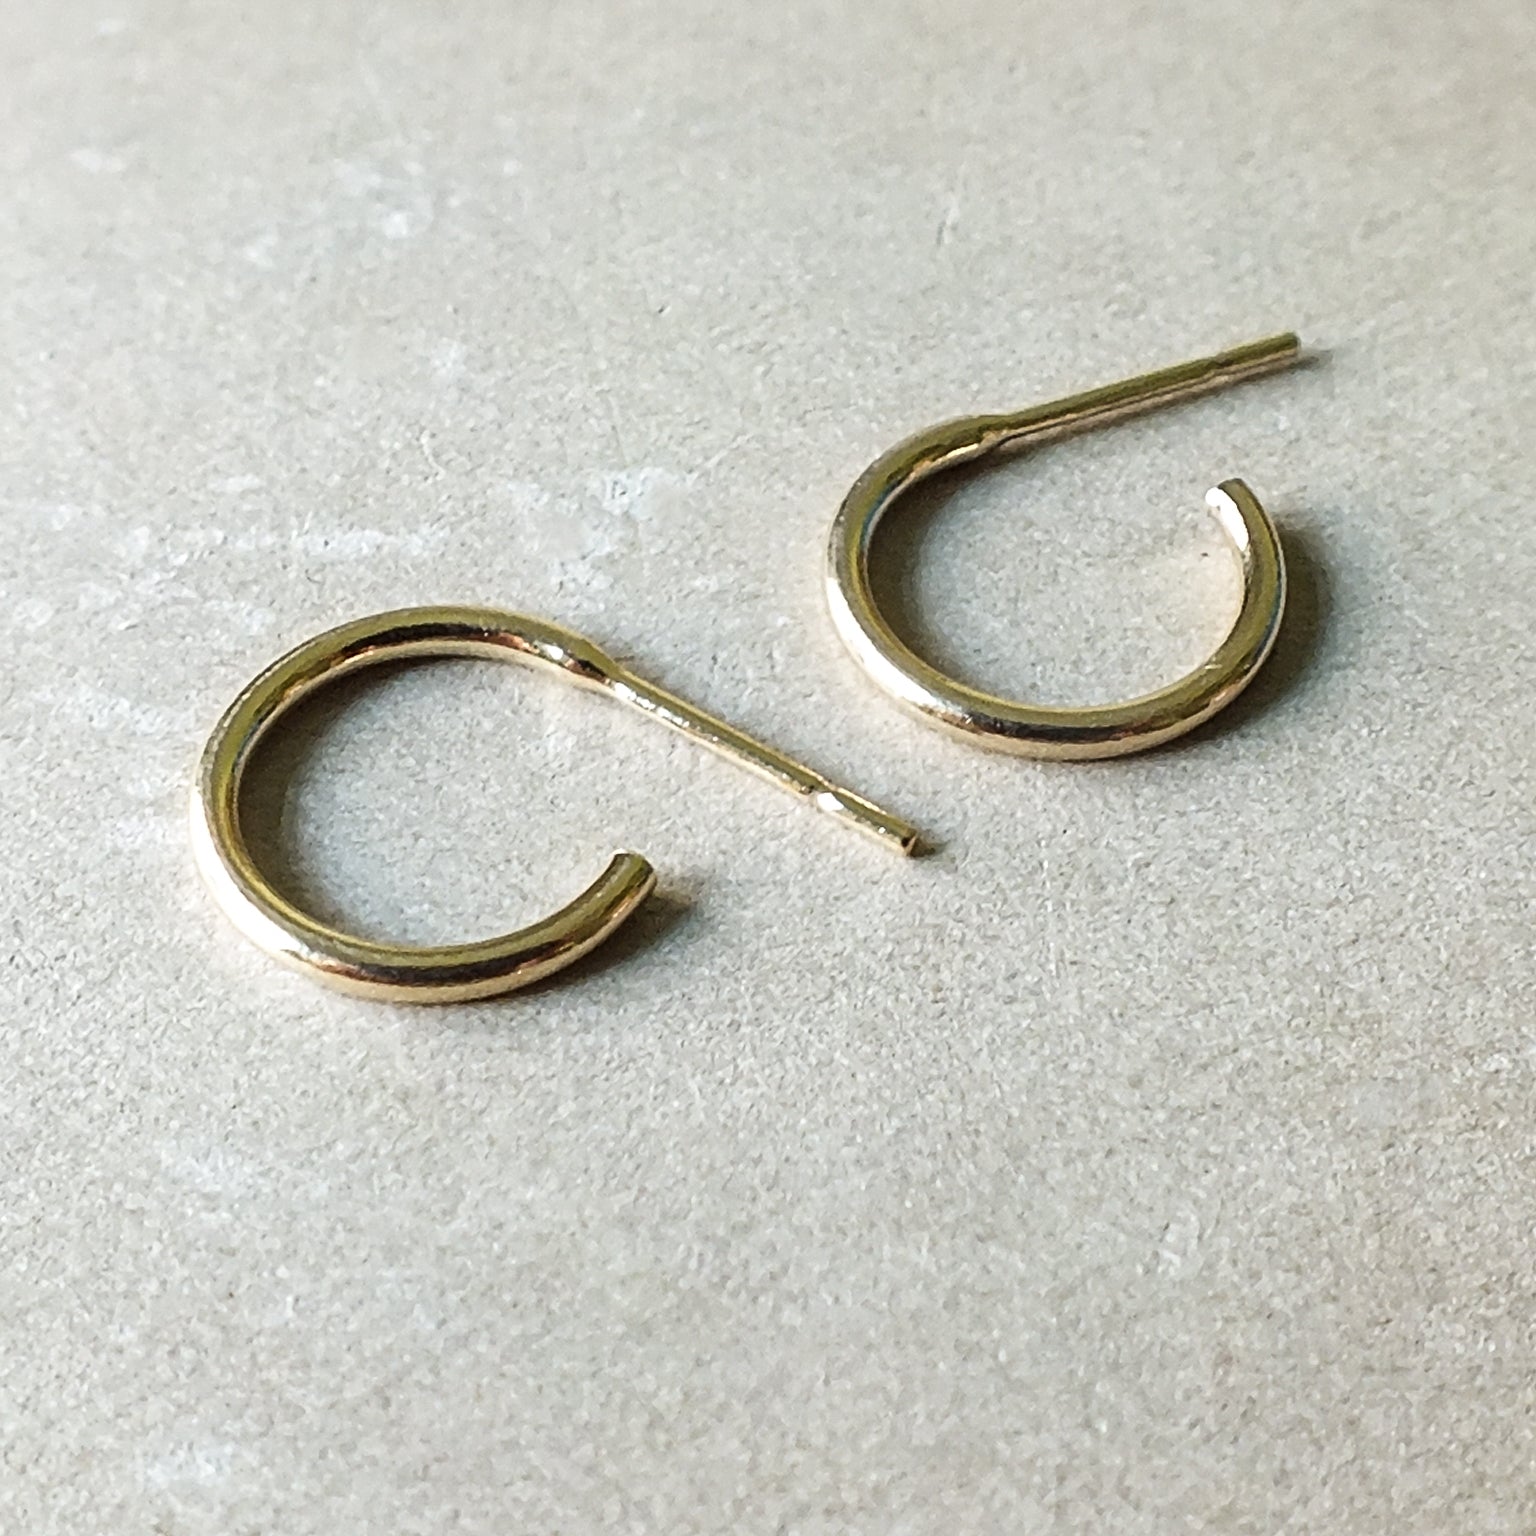 Pair of Becoming Jewelry Open Hoop Earrings, small on a light surface.